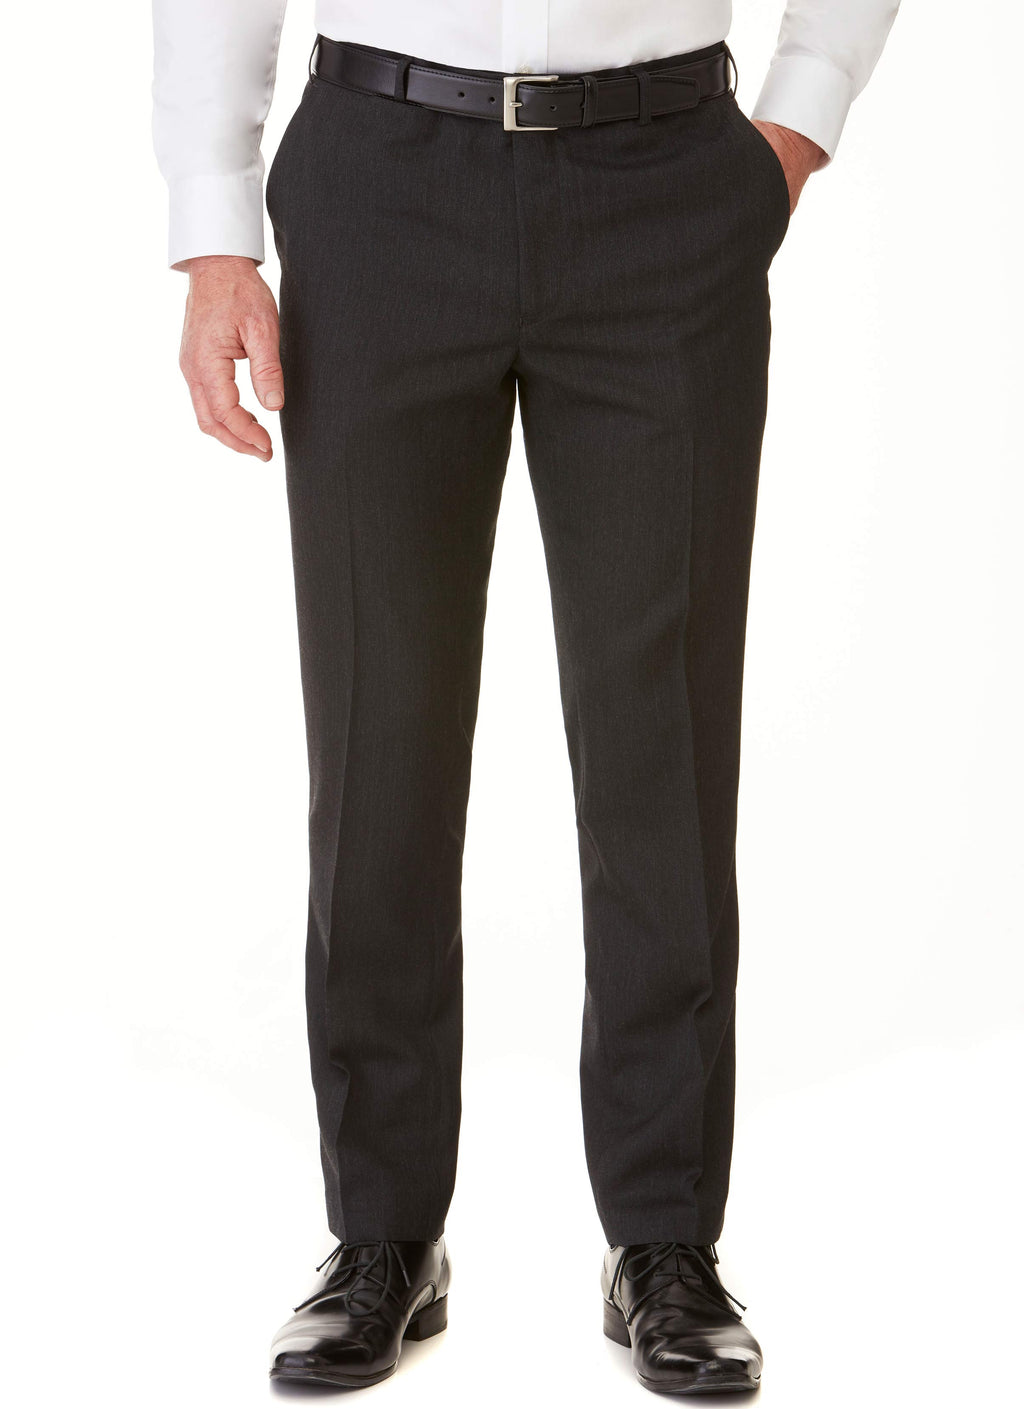 BARRABOOL CONTEMPORARY FIT TROUSERS - CHARCOAL